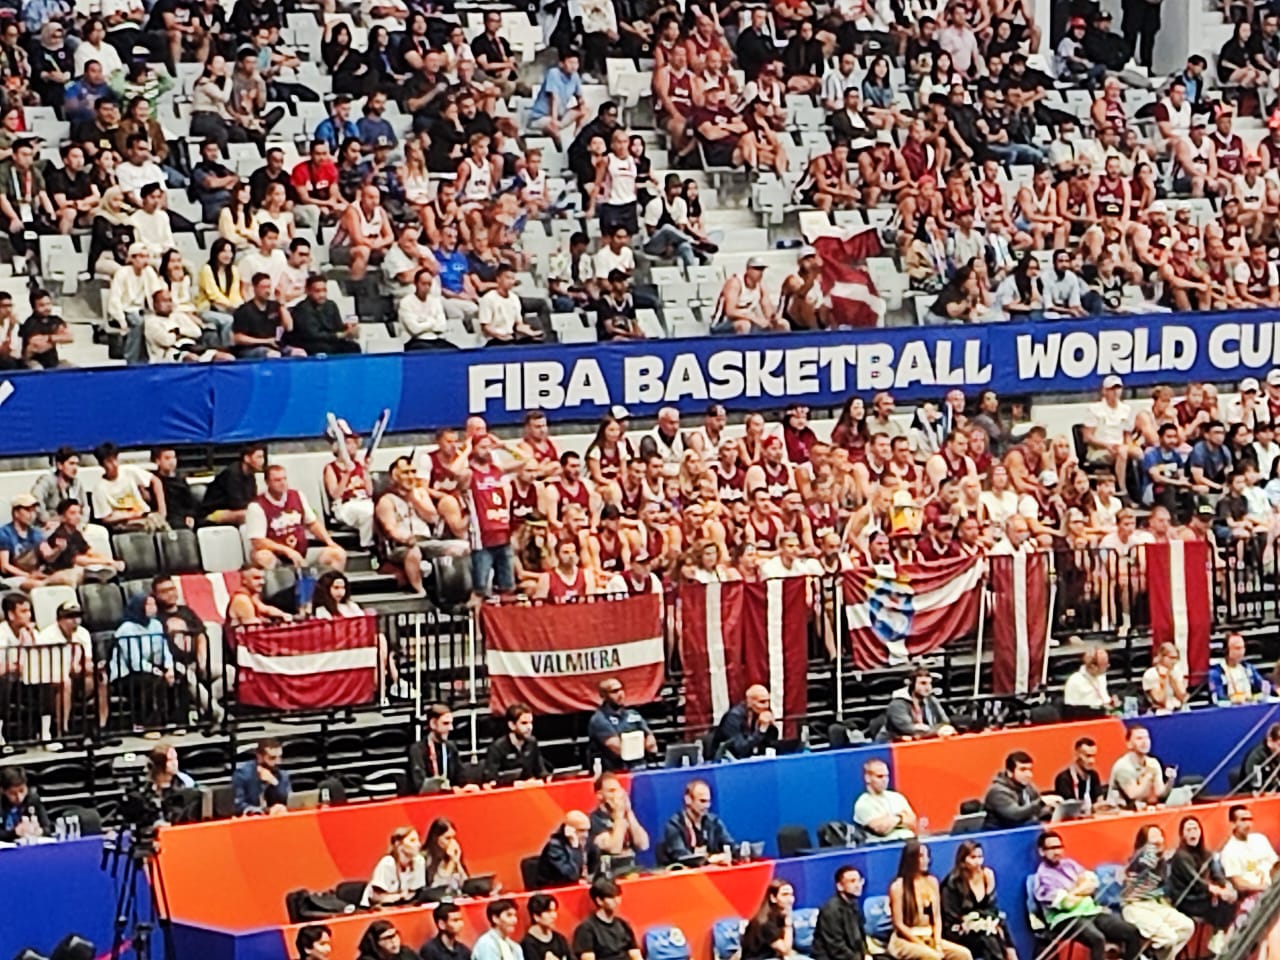 Latvia Addicted To Win At The FIBA World Cup 2023 is Now Aiming For Canada To Take The Position